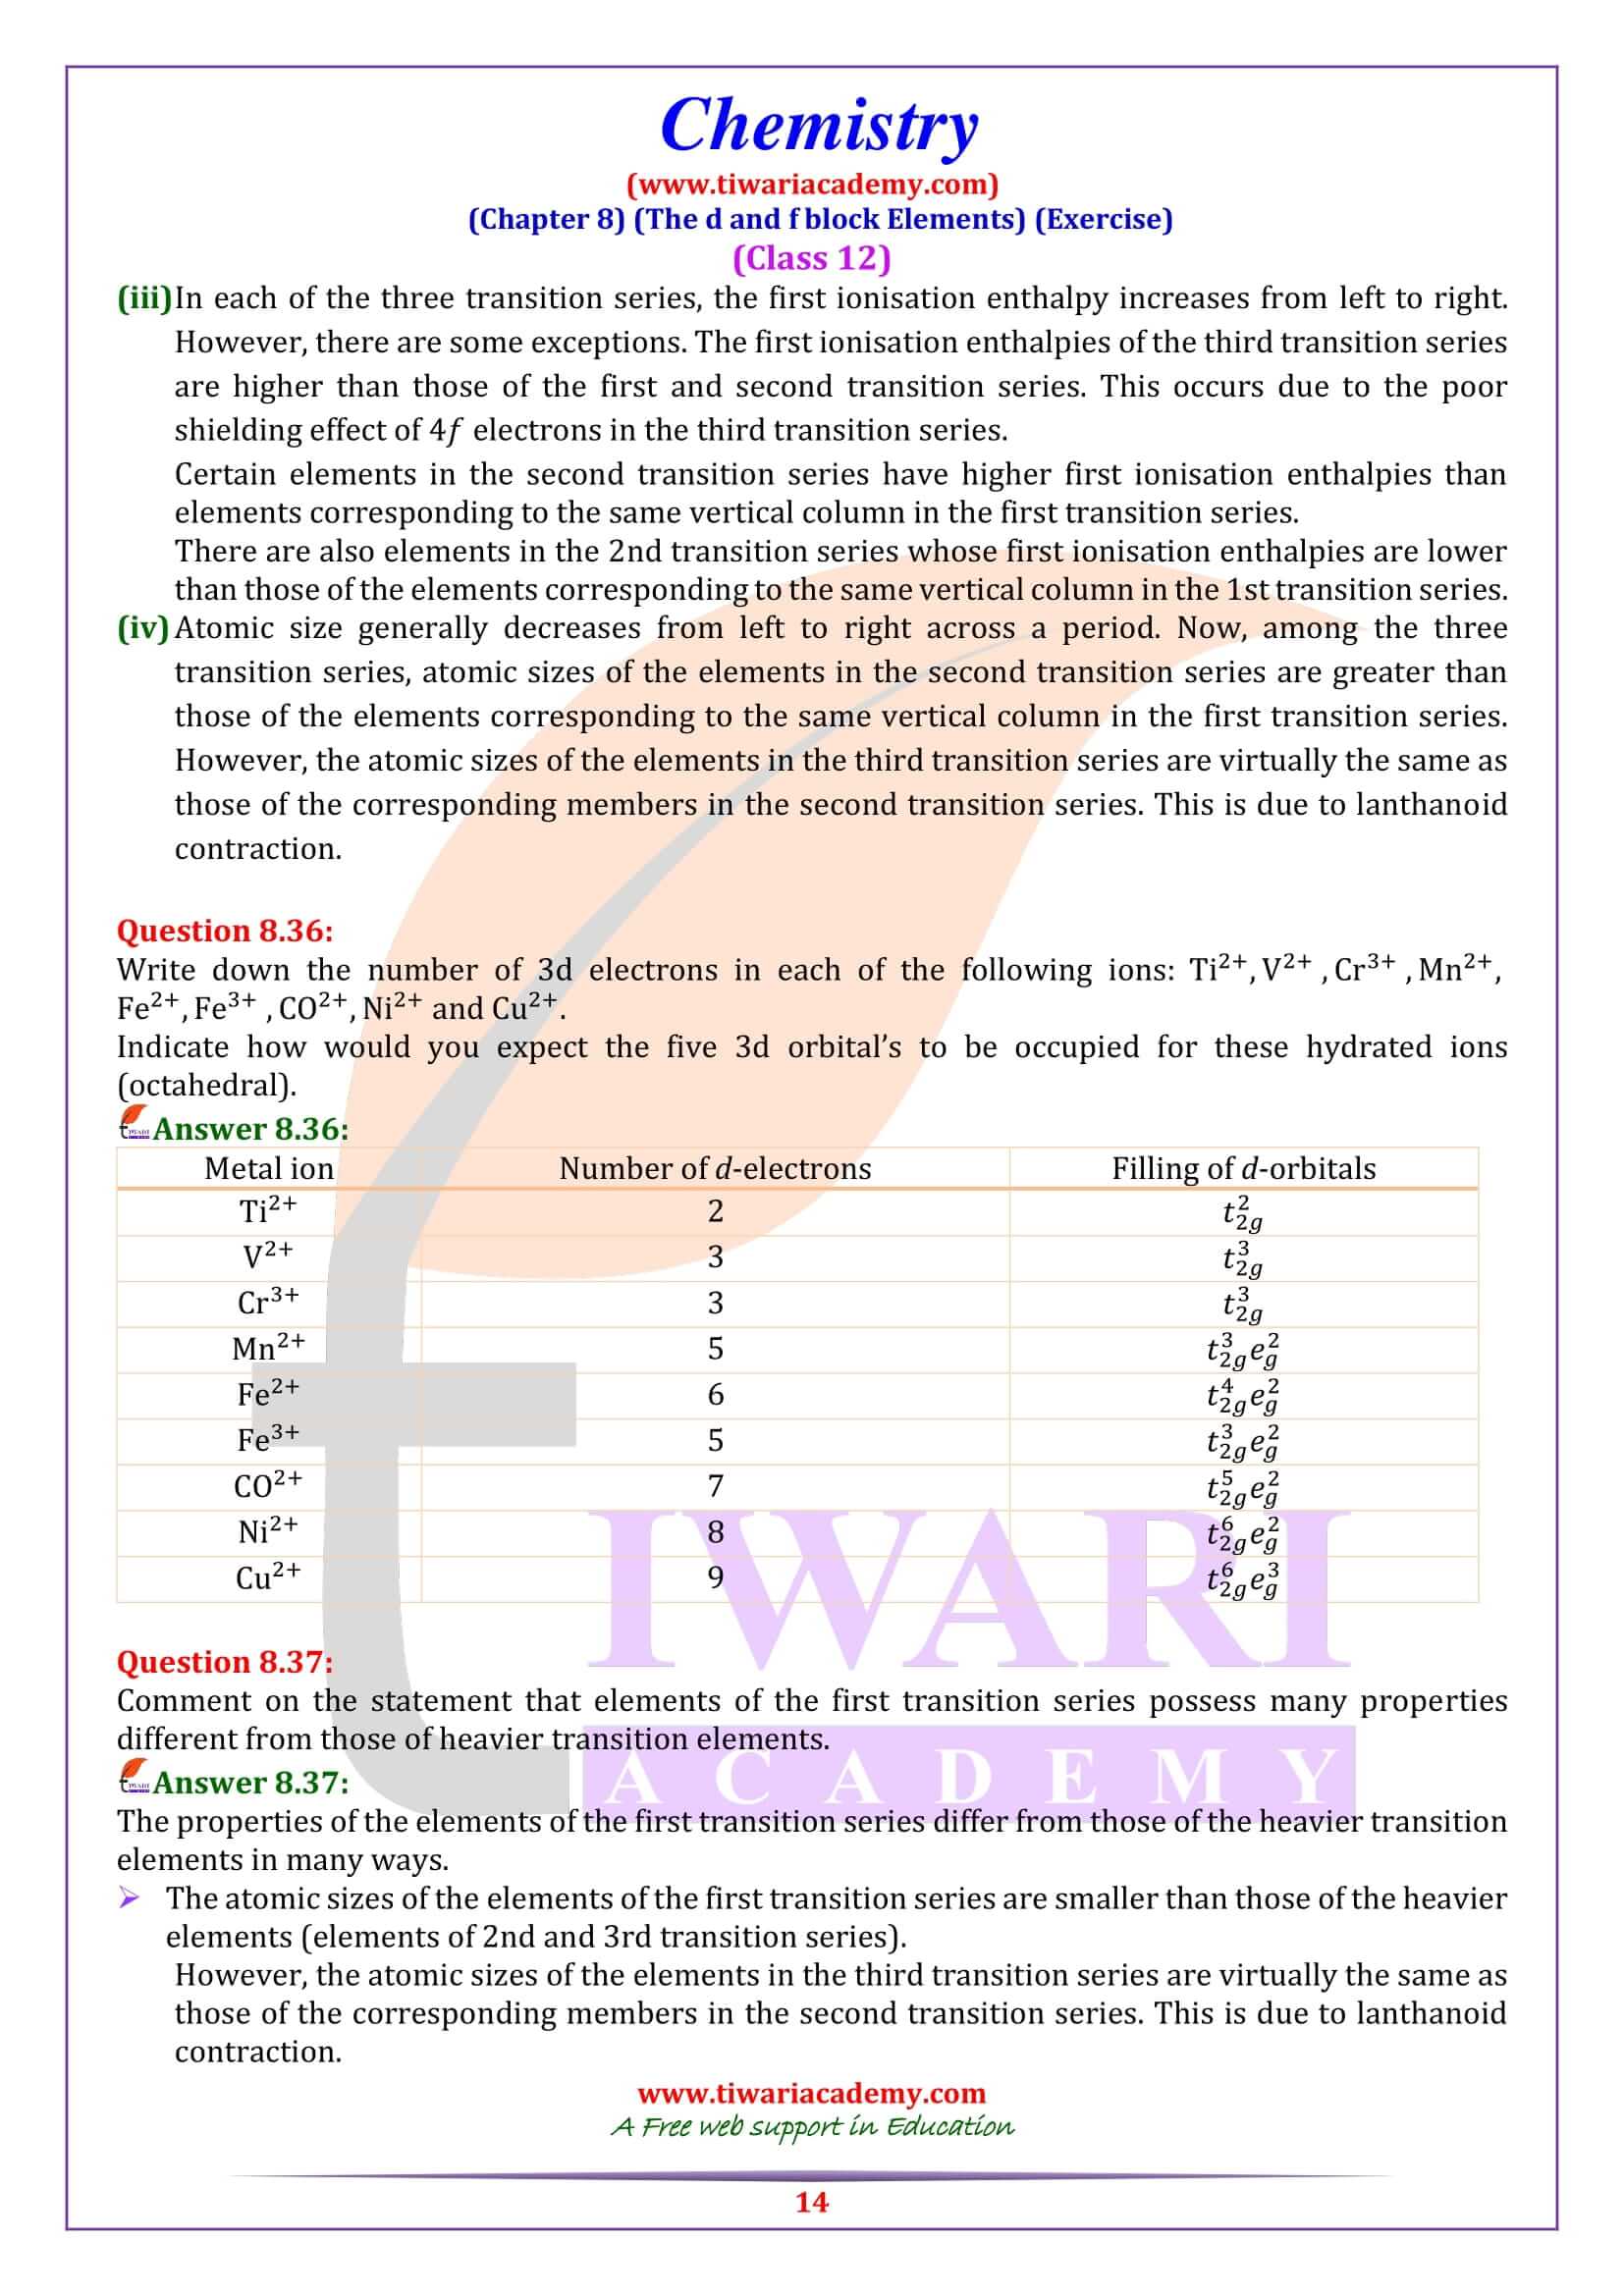 NCERT Solutions for Class 12 Chemistry Chapter 8 book exercises